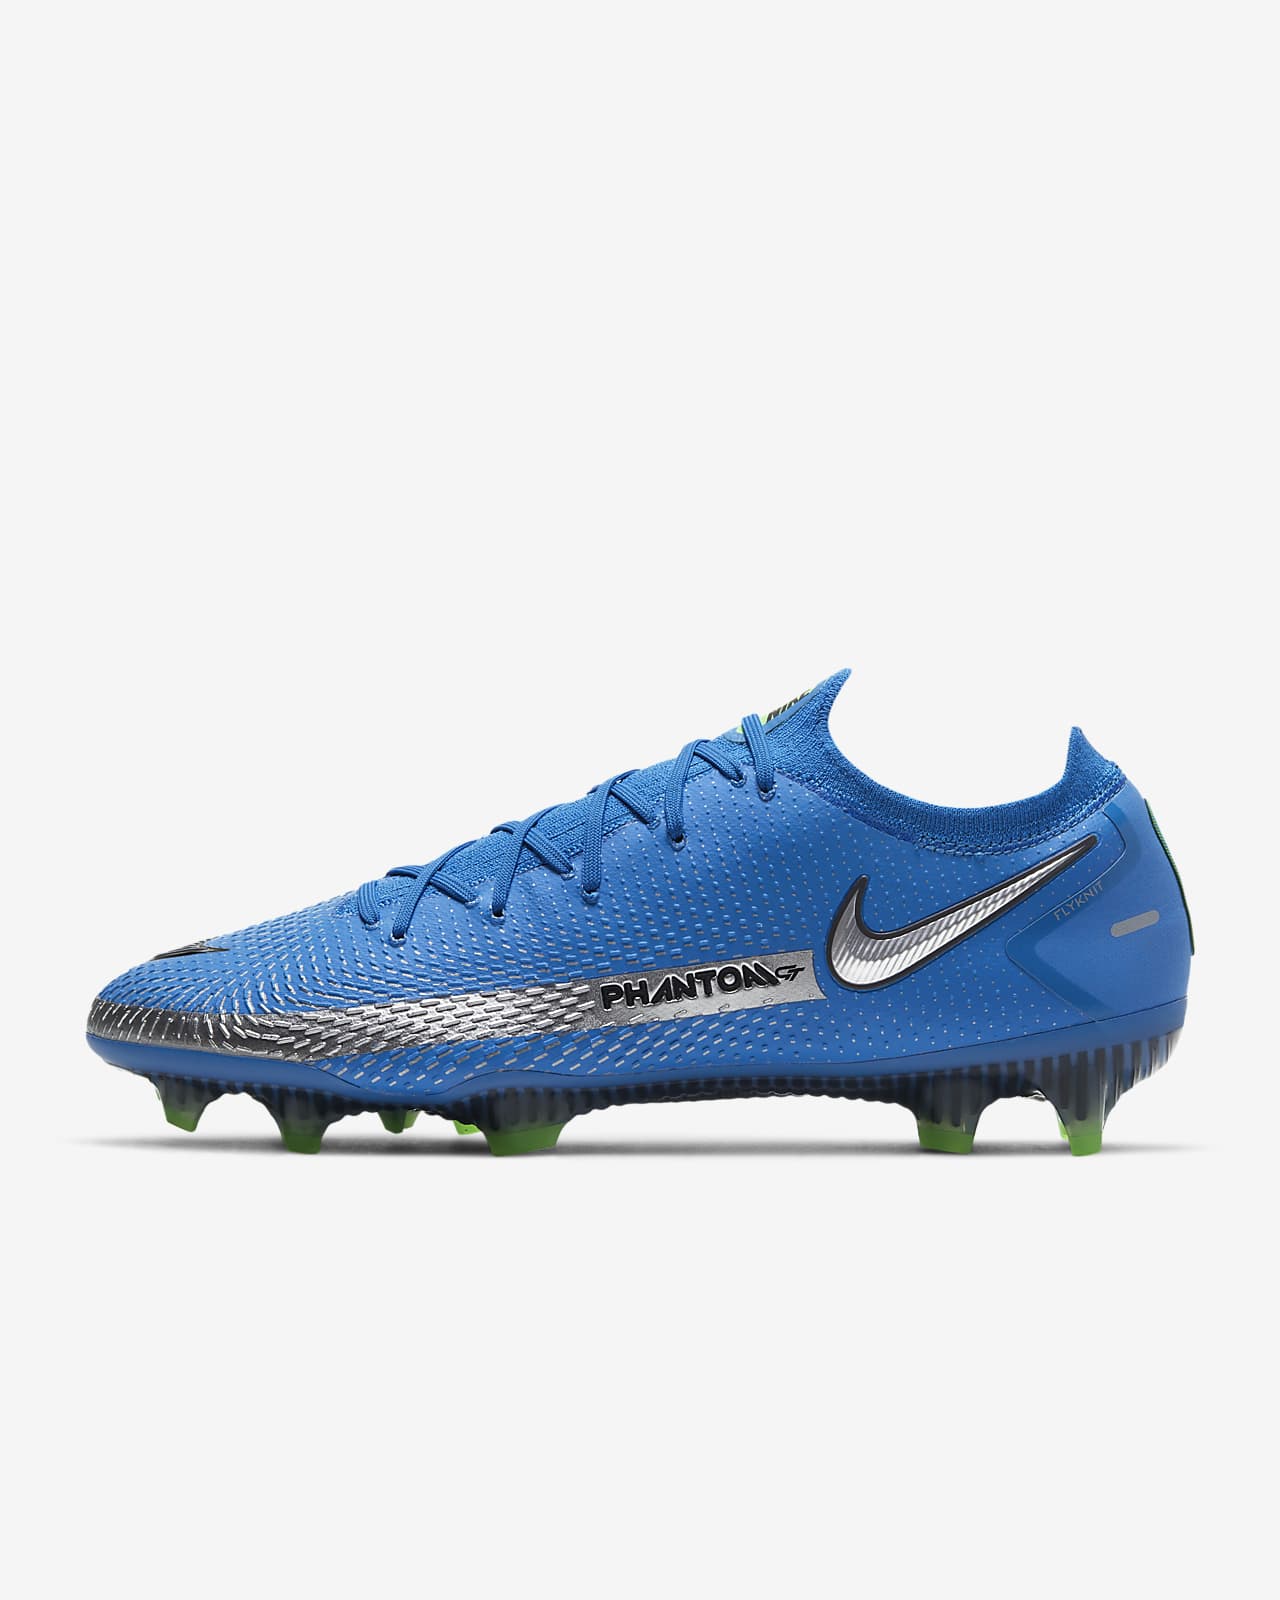 nike football boots online